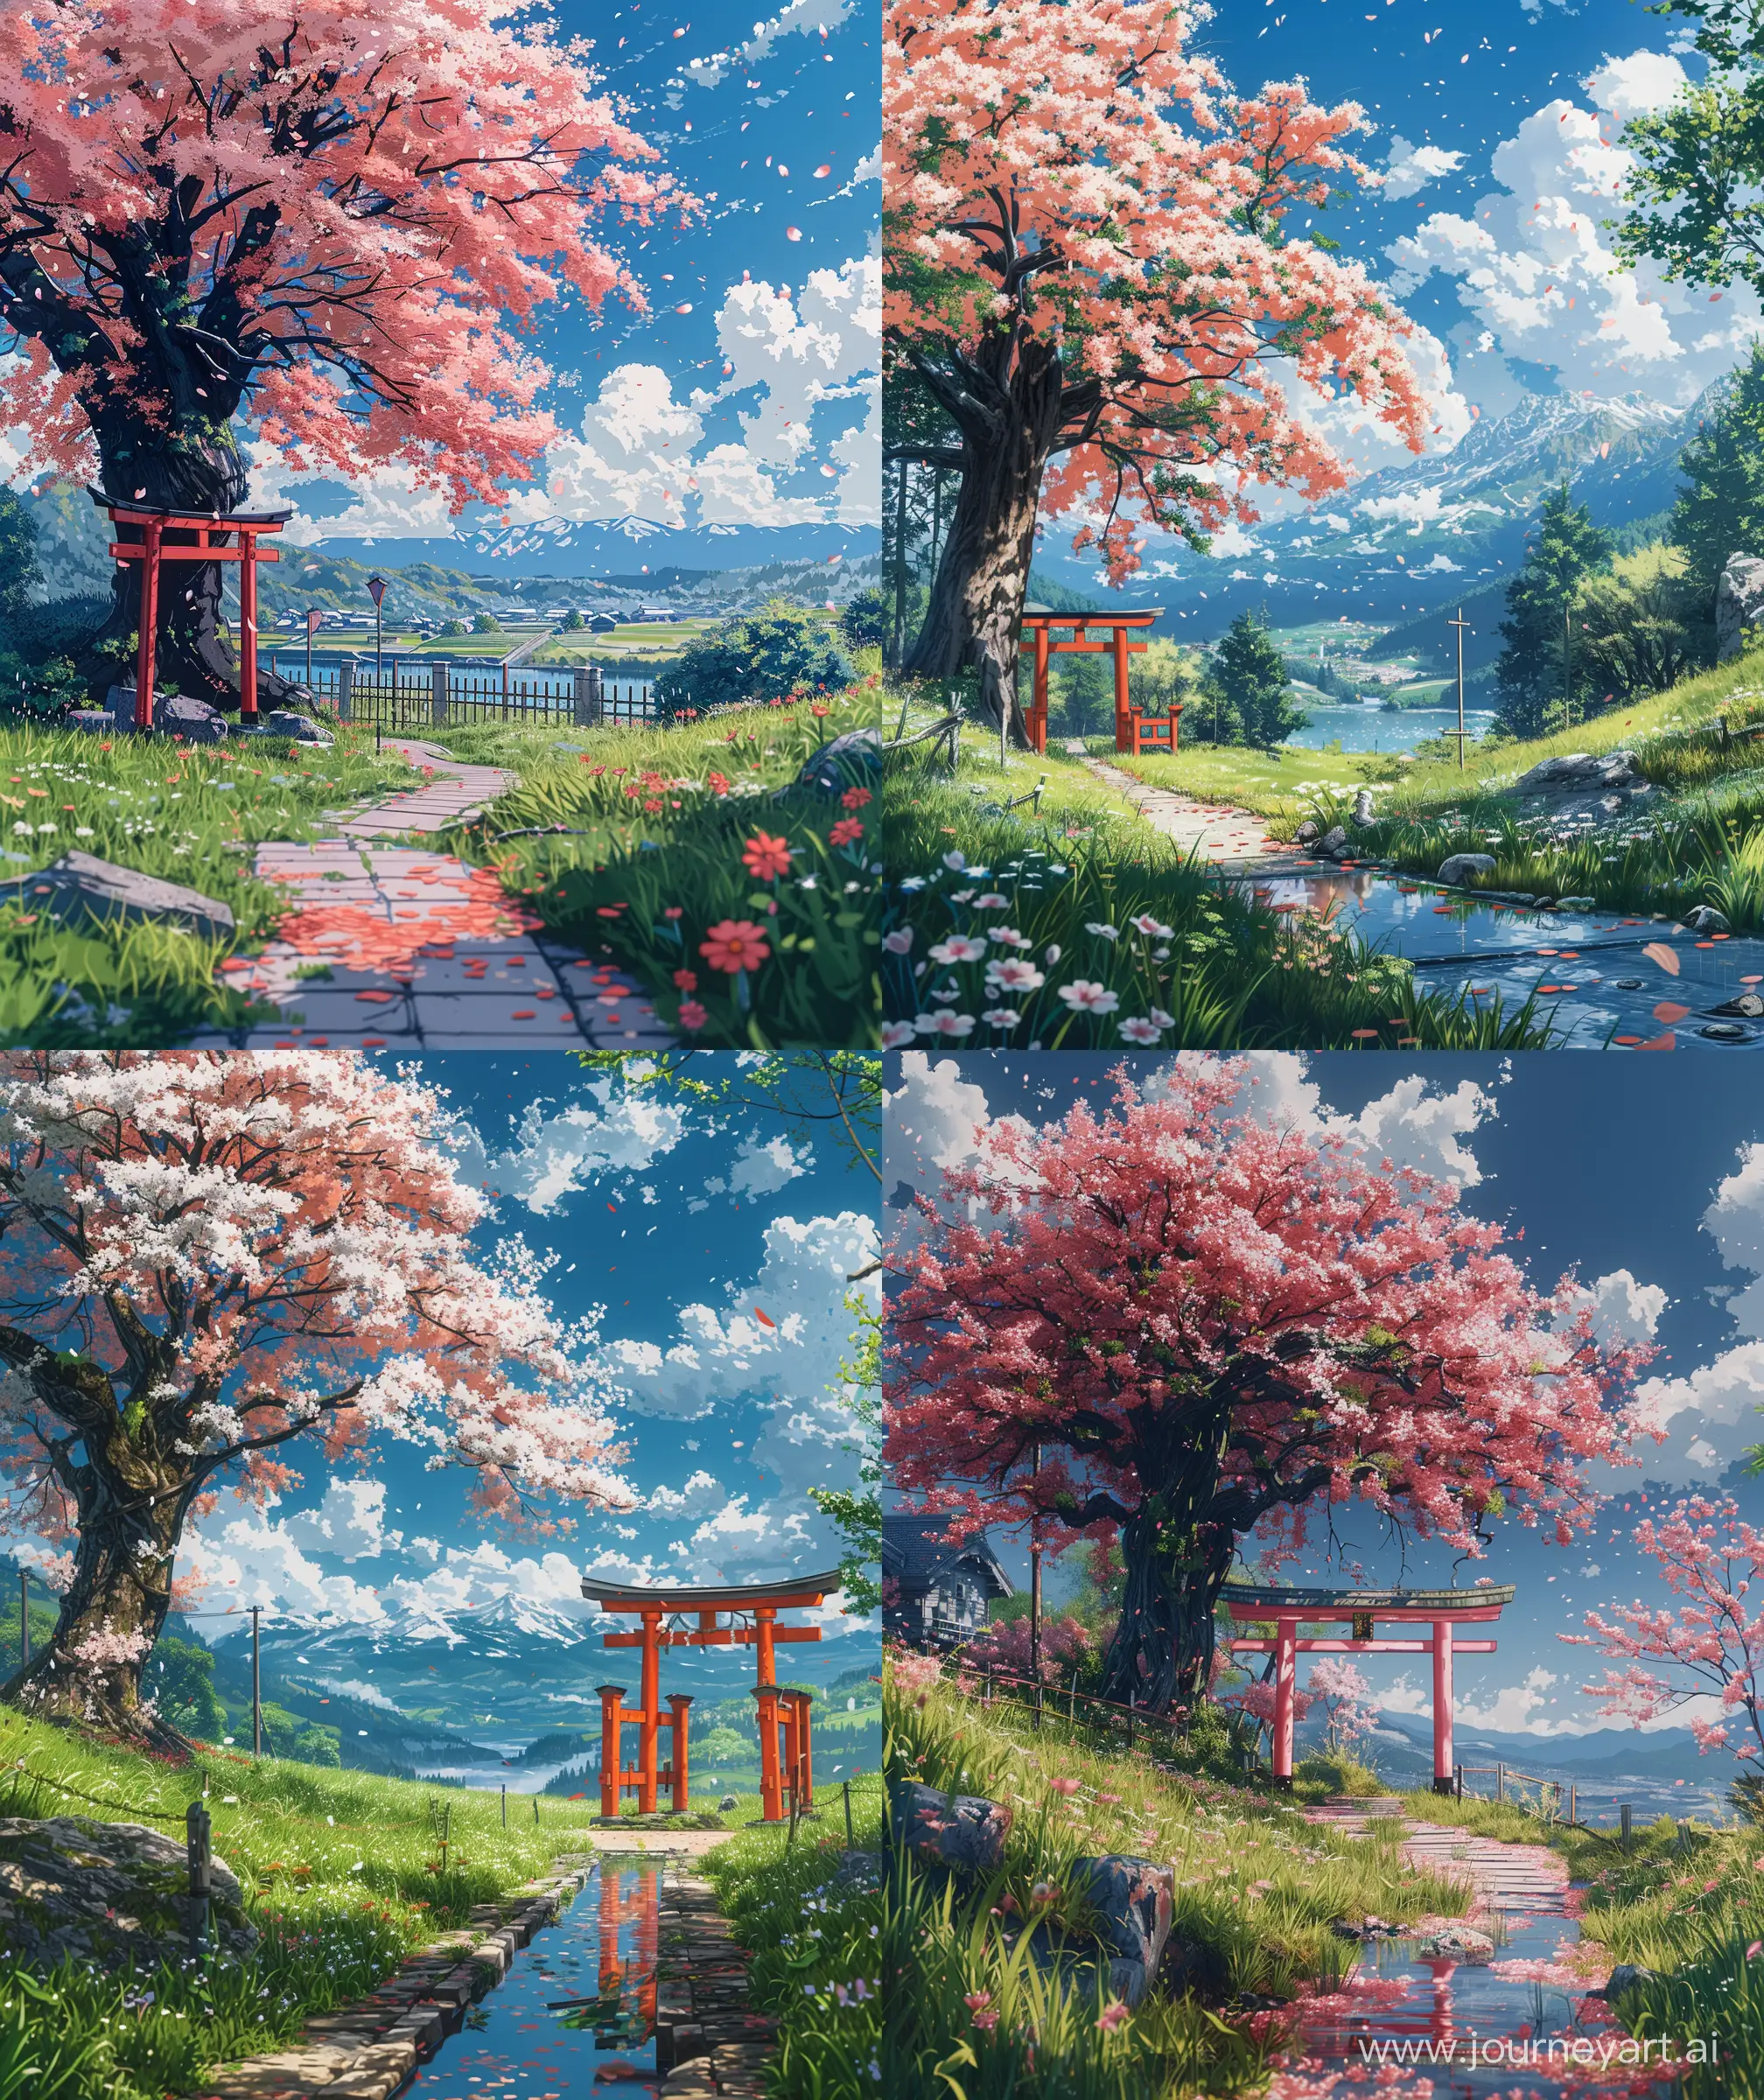 Beautiful anime scenary, mokoto shinkai style, country side walk way, big cheery blossom tree, "red tori gate front of cherry blossom tree", grass and flowers, small water flowing, Switzerland country side, morning view, illustration, ultra HD, high quality, sharp details, no hyperrealistic --ar 27:32 --s 400